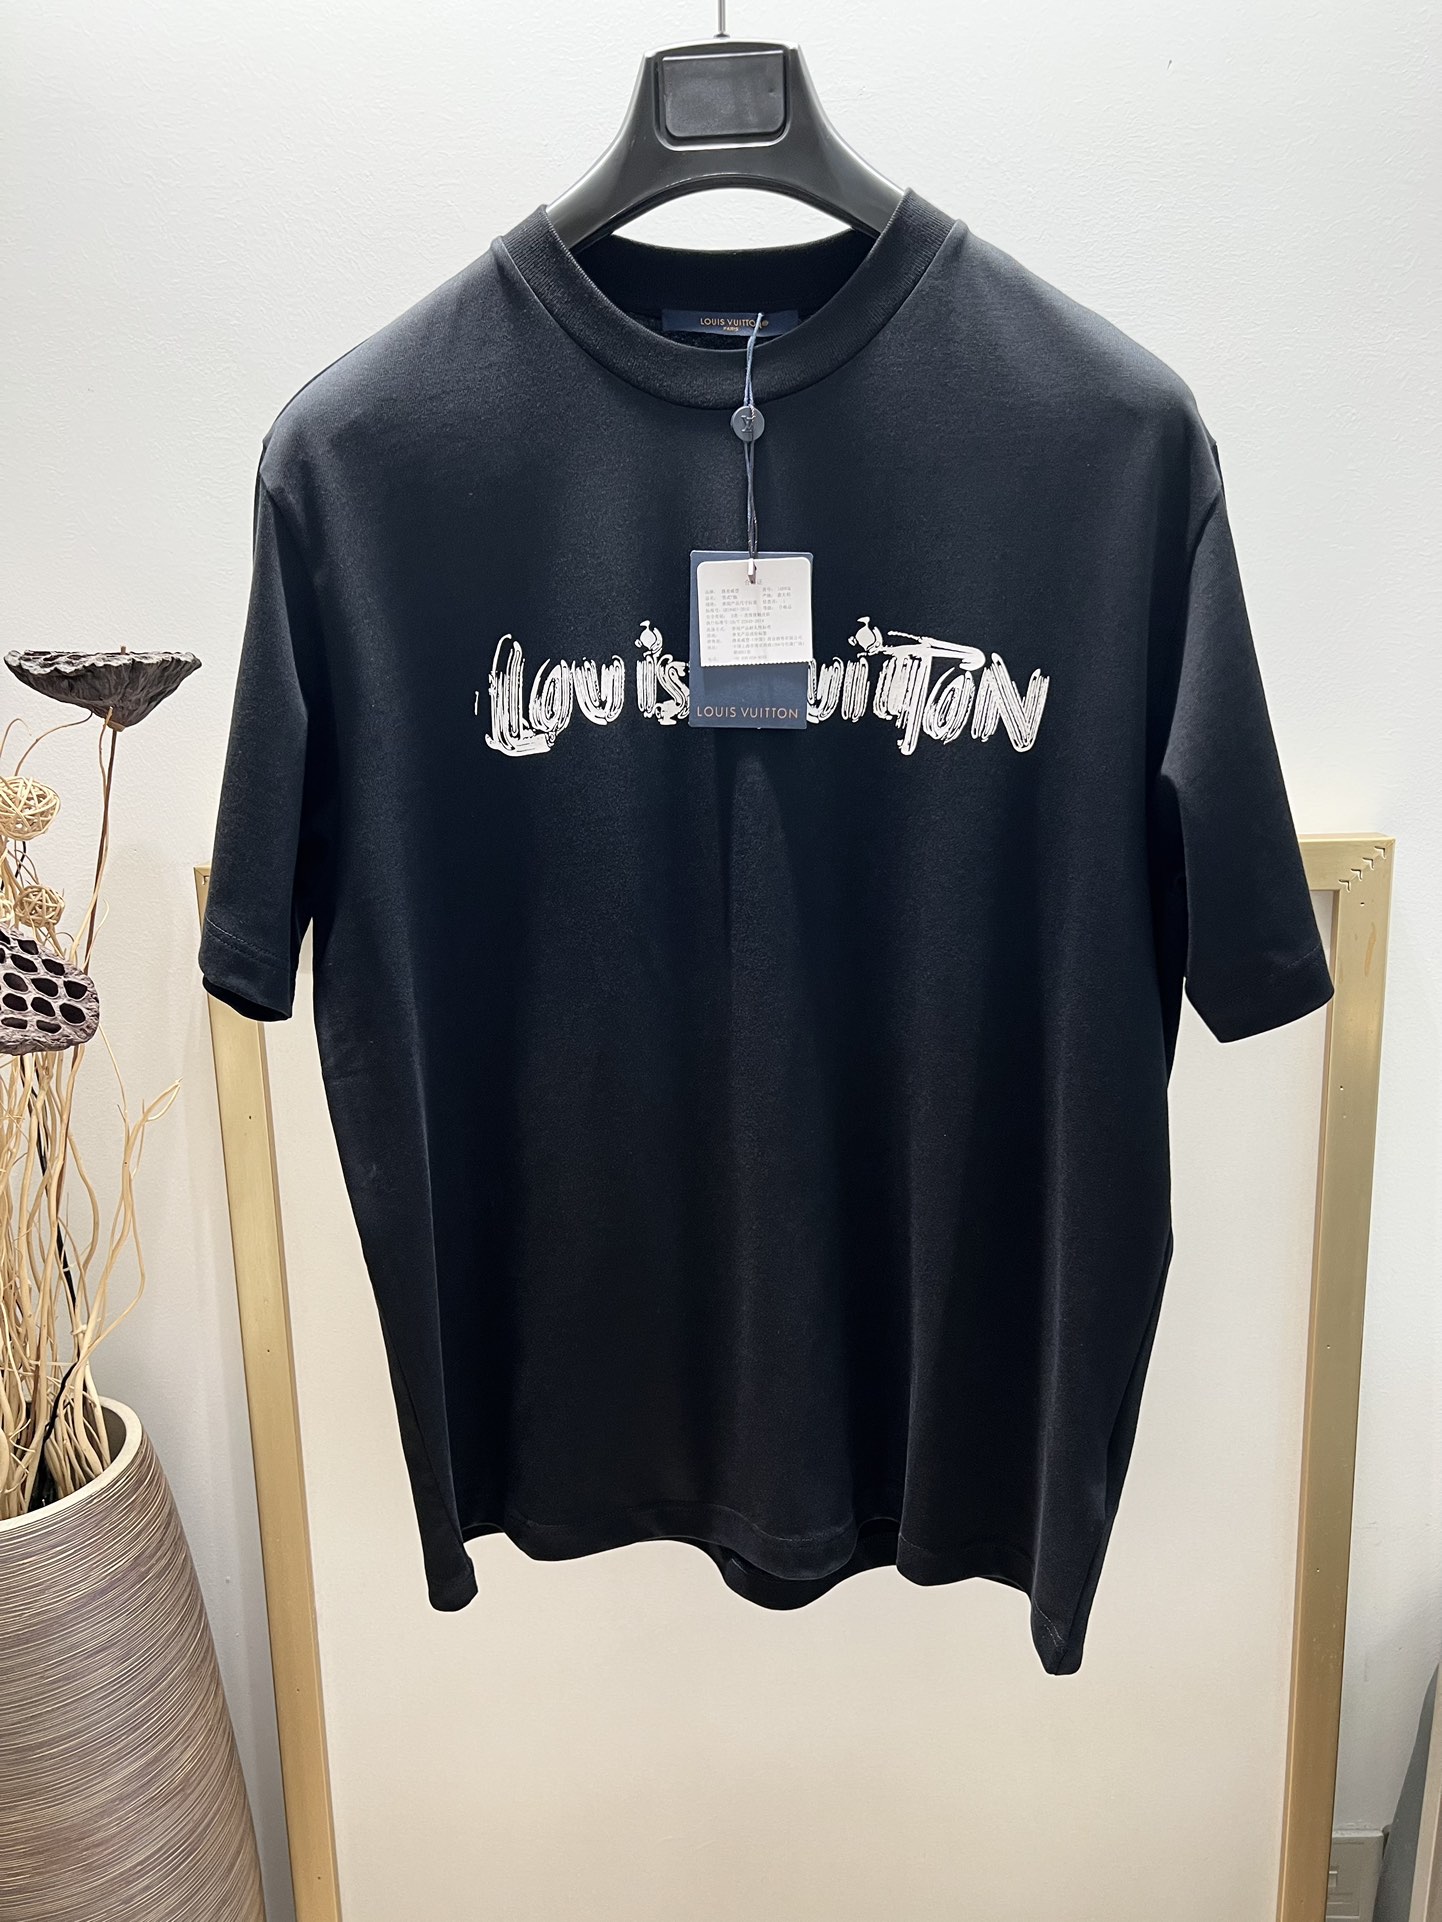 Louis Vuitton Clothing T-Shirt Black Doodle Grey Printing Unisex Cotton Spring Collection Casual